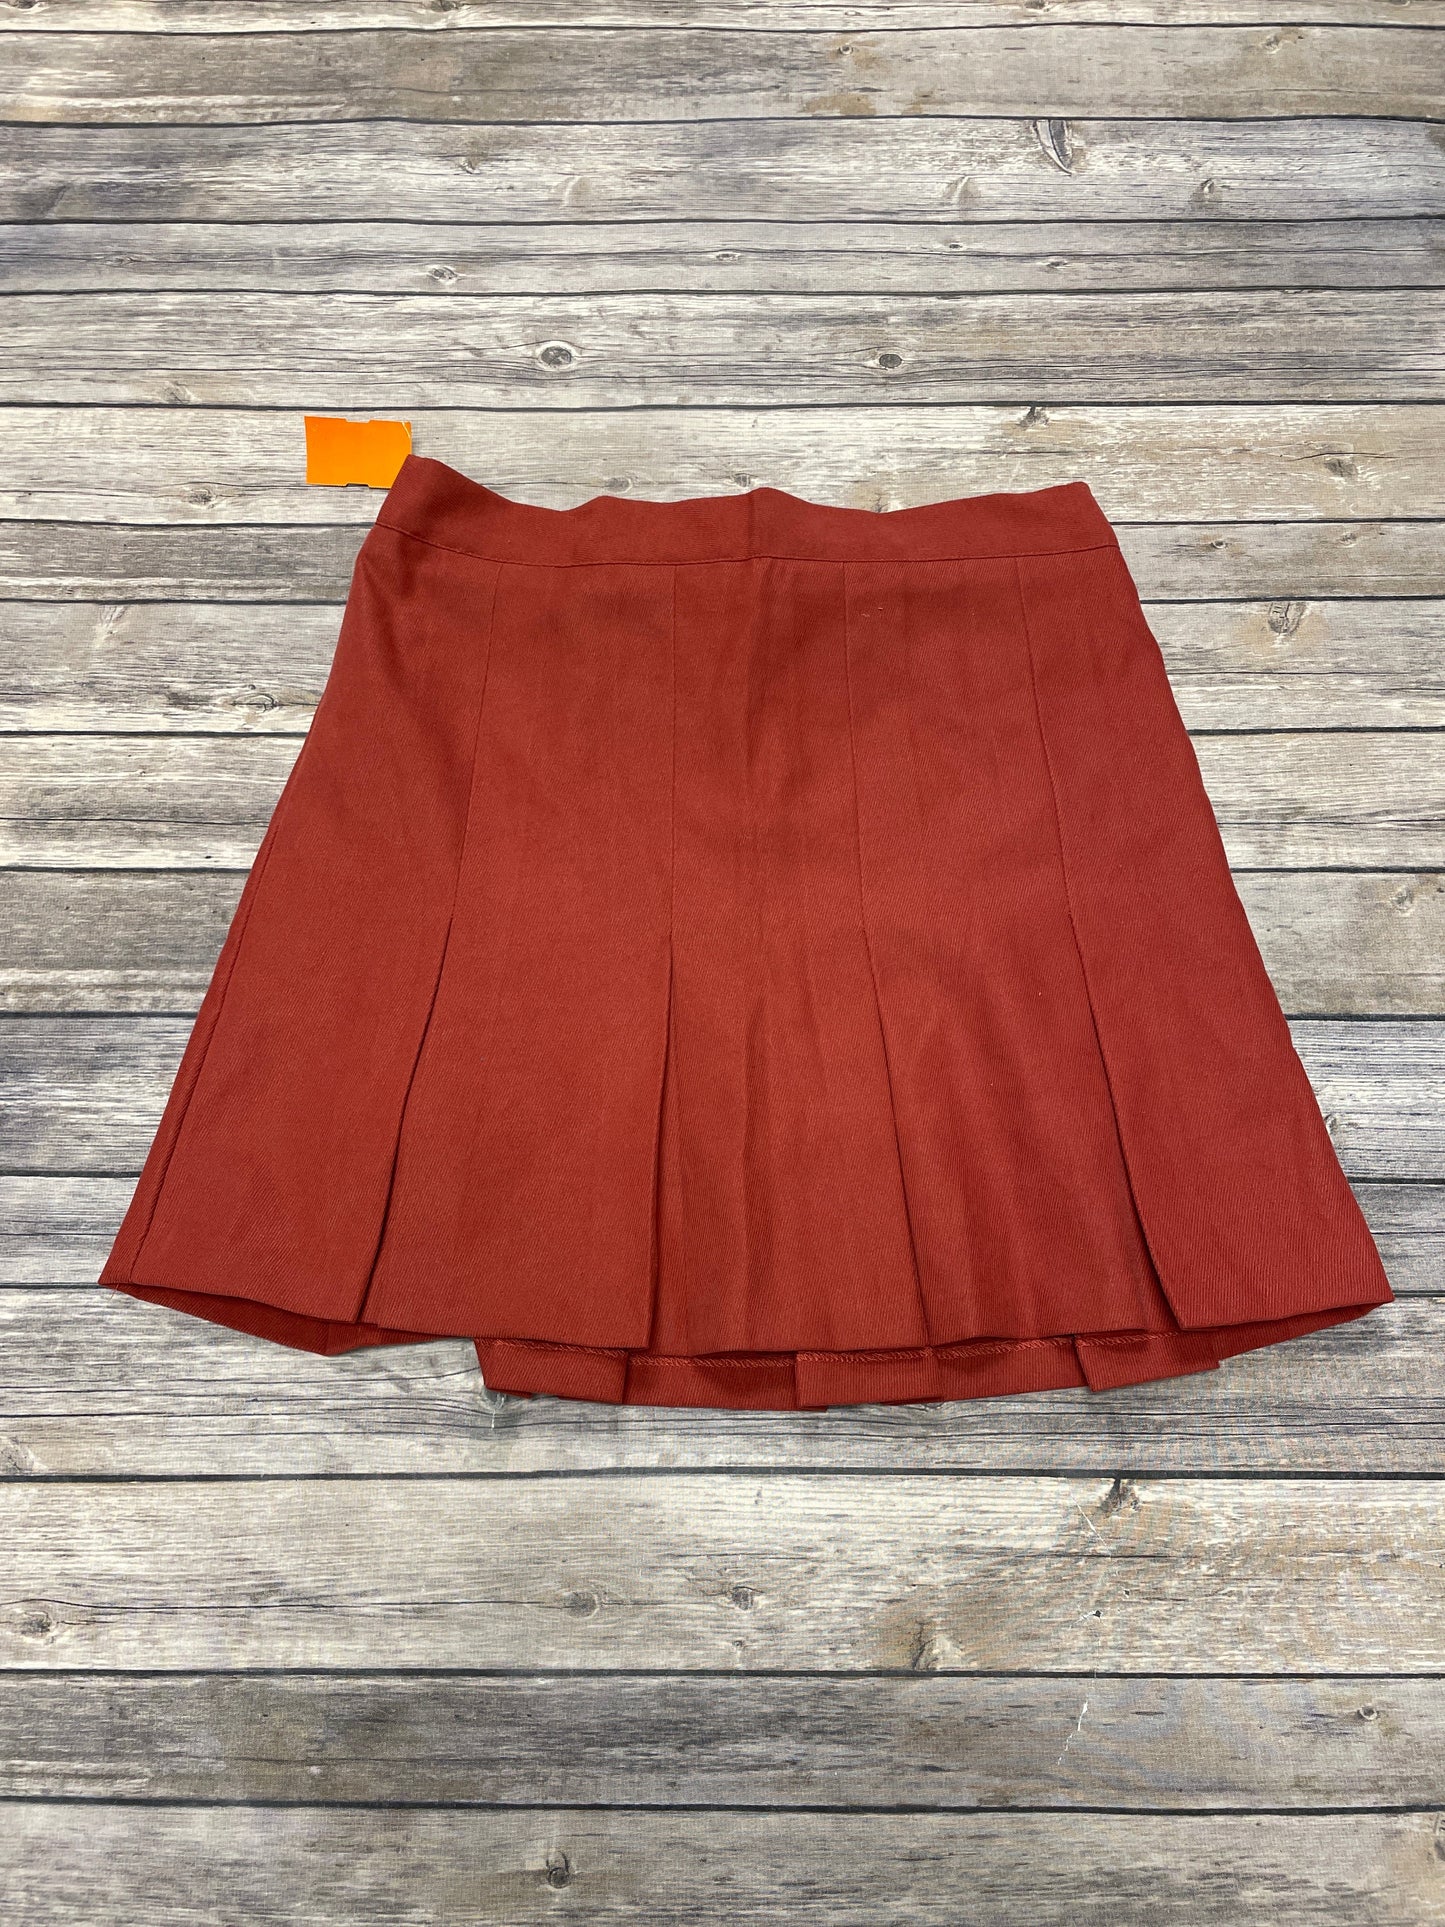 Skirt Mini & Short By Cme  Size: L